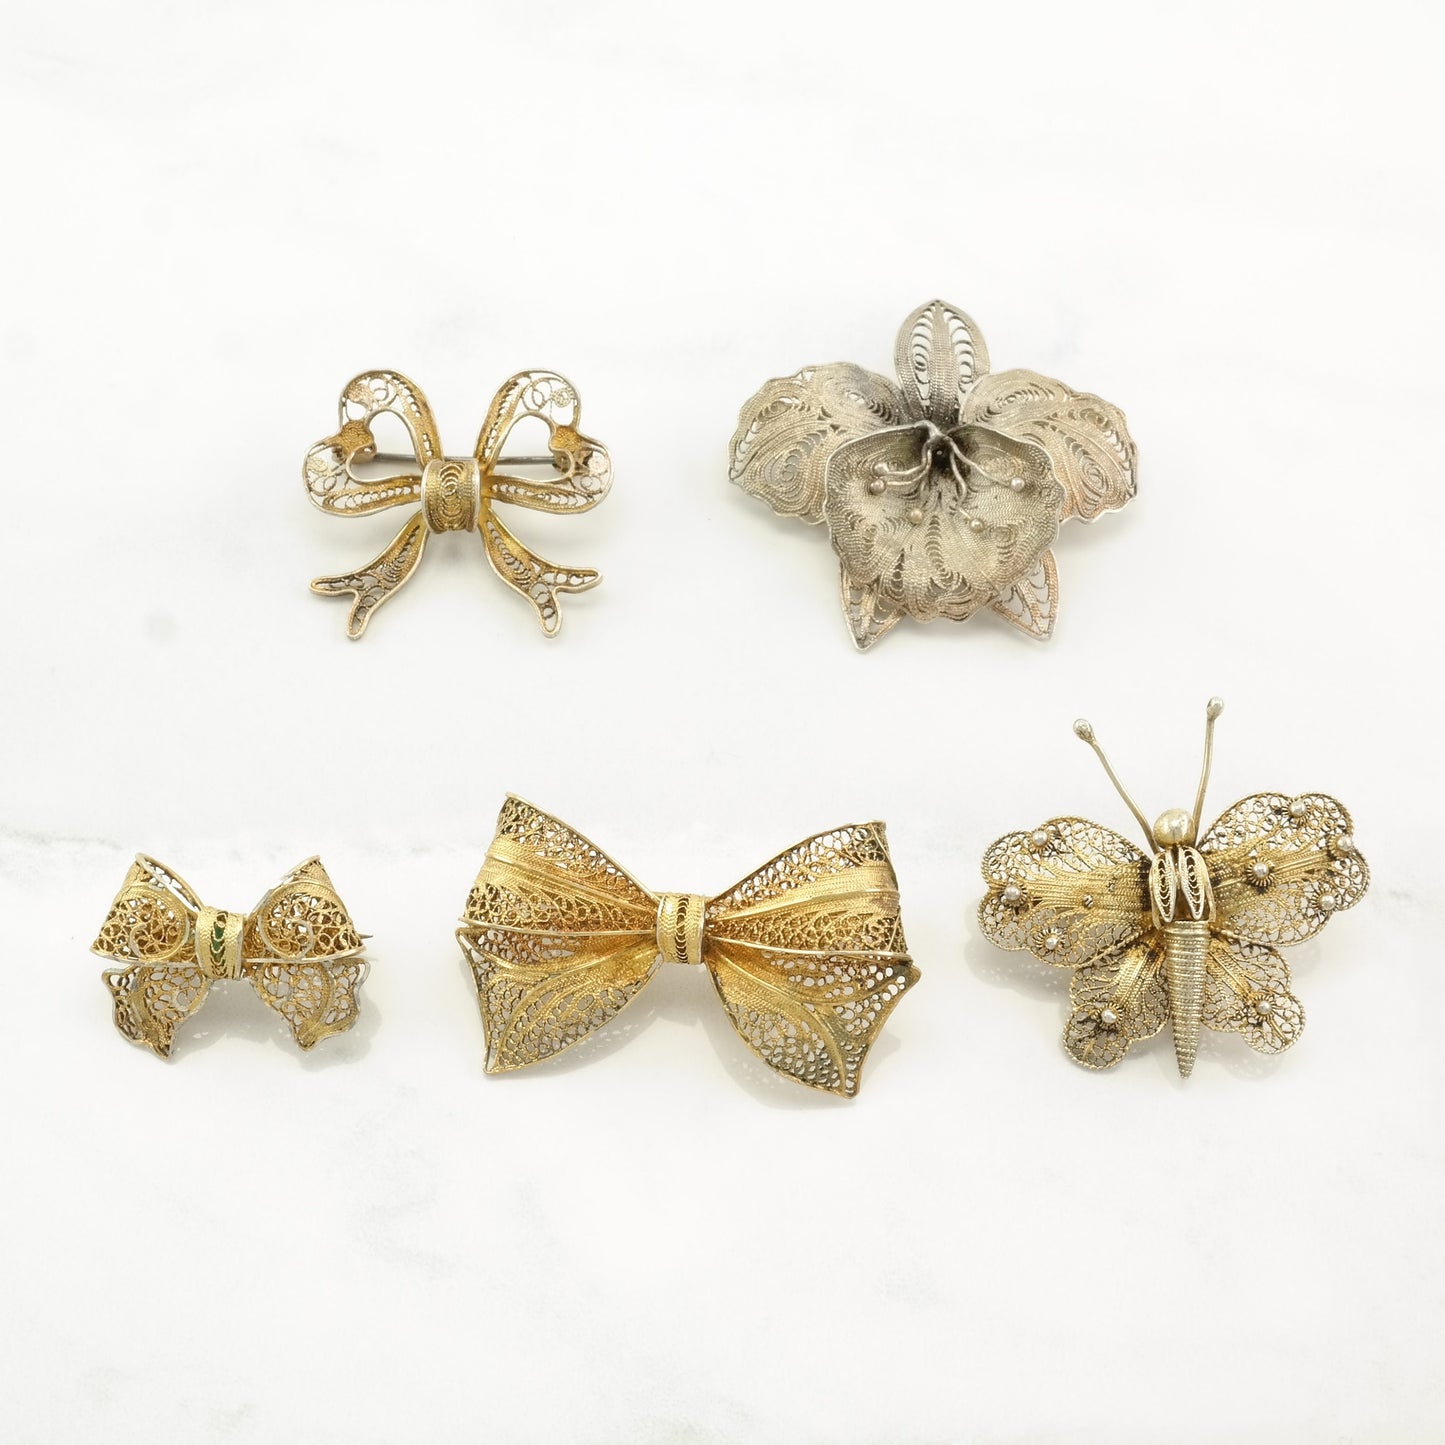 Vintage Brooch Floral, Bow, Butterfly Filigree, Gold Hue Sterling Silver